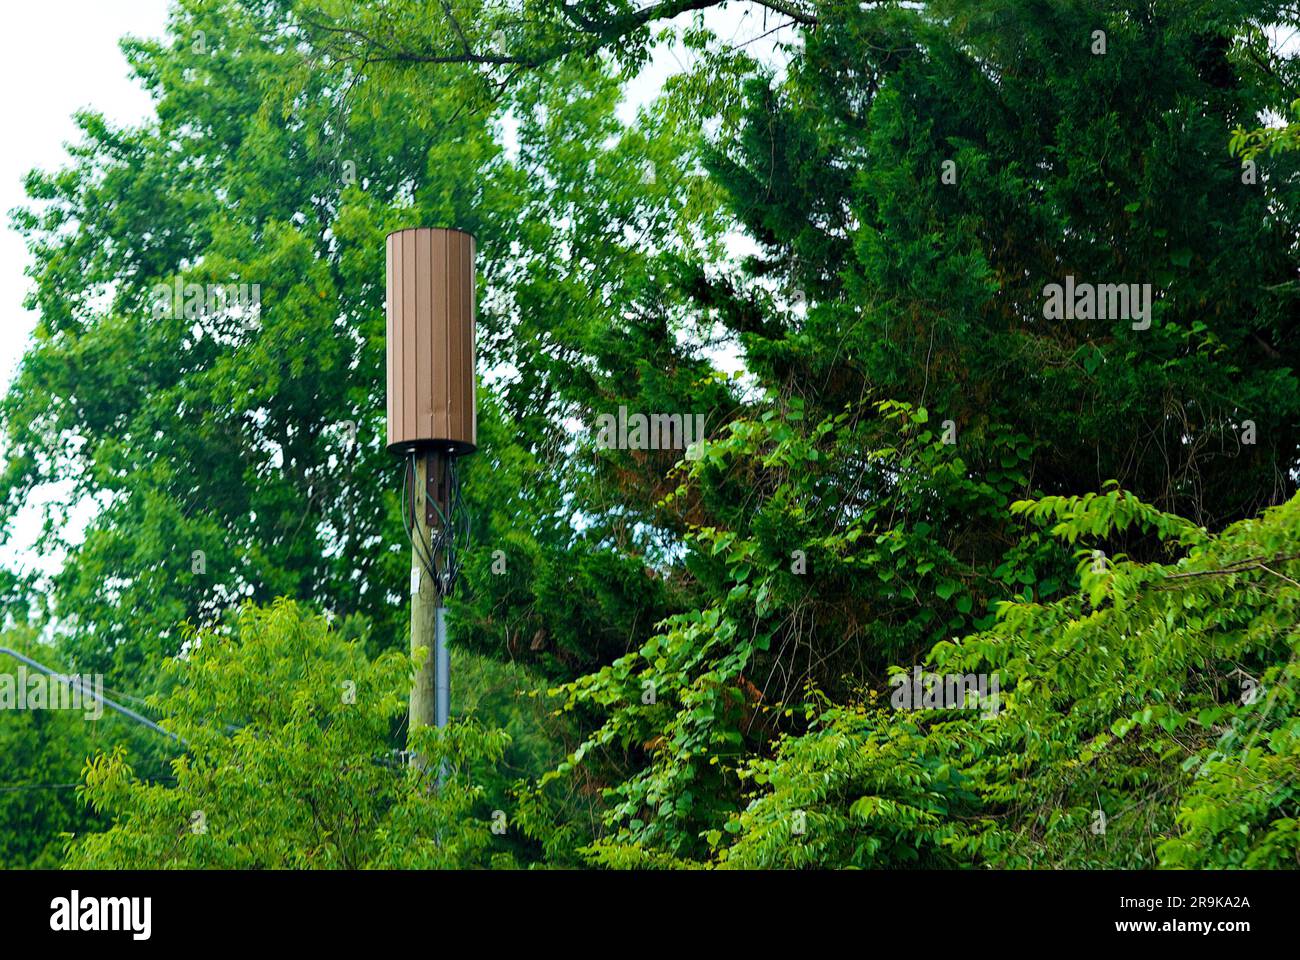 A 5G mobile communications antenna used for high-speed, broadband data stands out among trees in a heavily wooded suburban neighborhood. Stock Photo